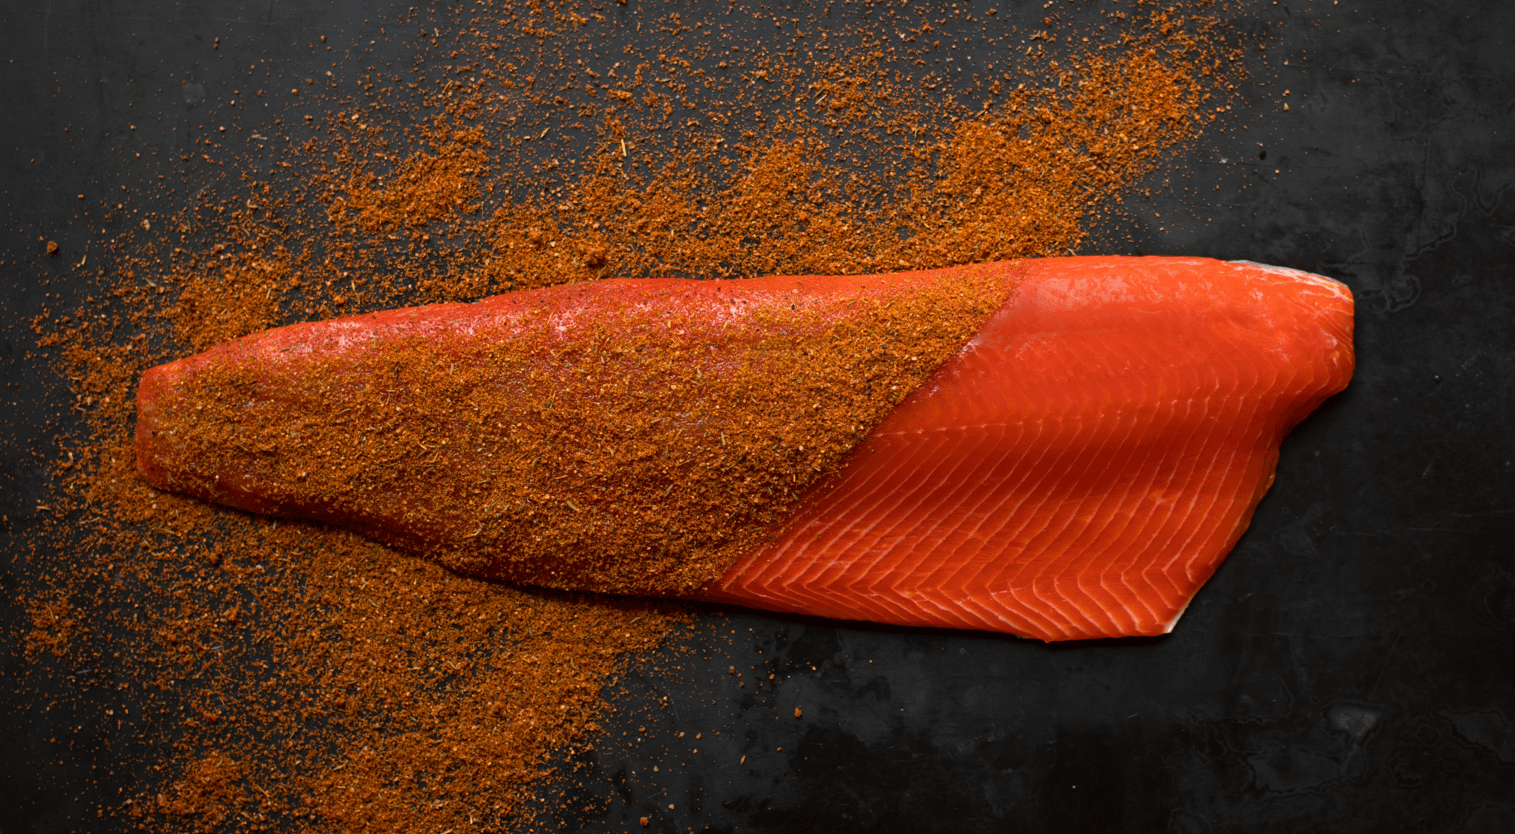 Sockeye salmon fillet sprinkled with spices